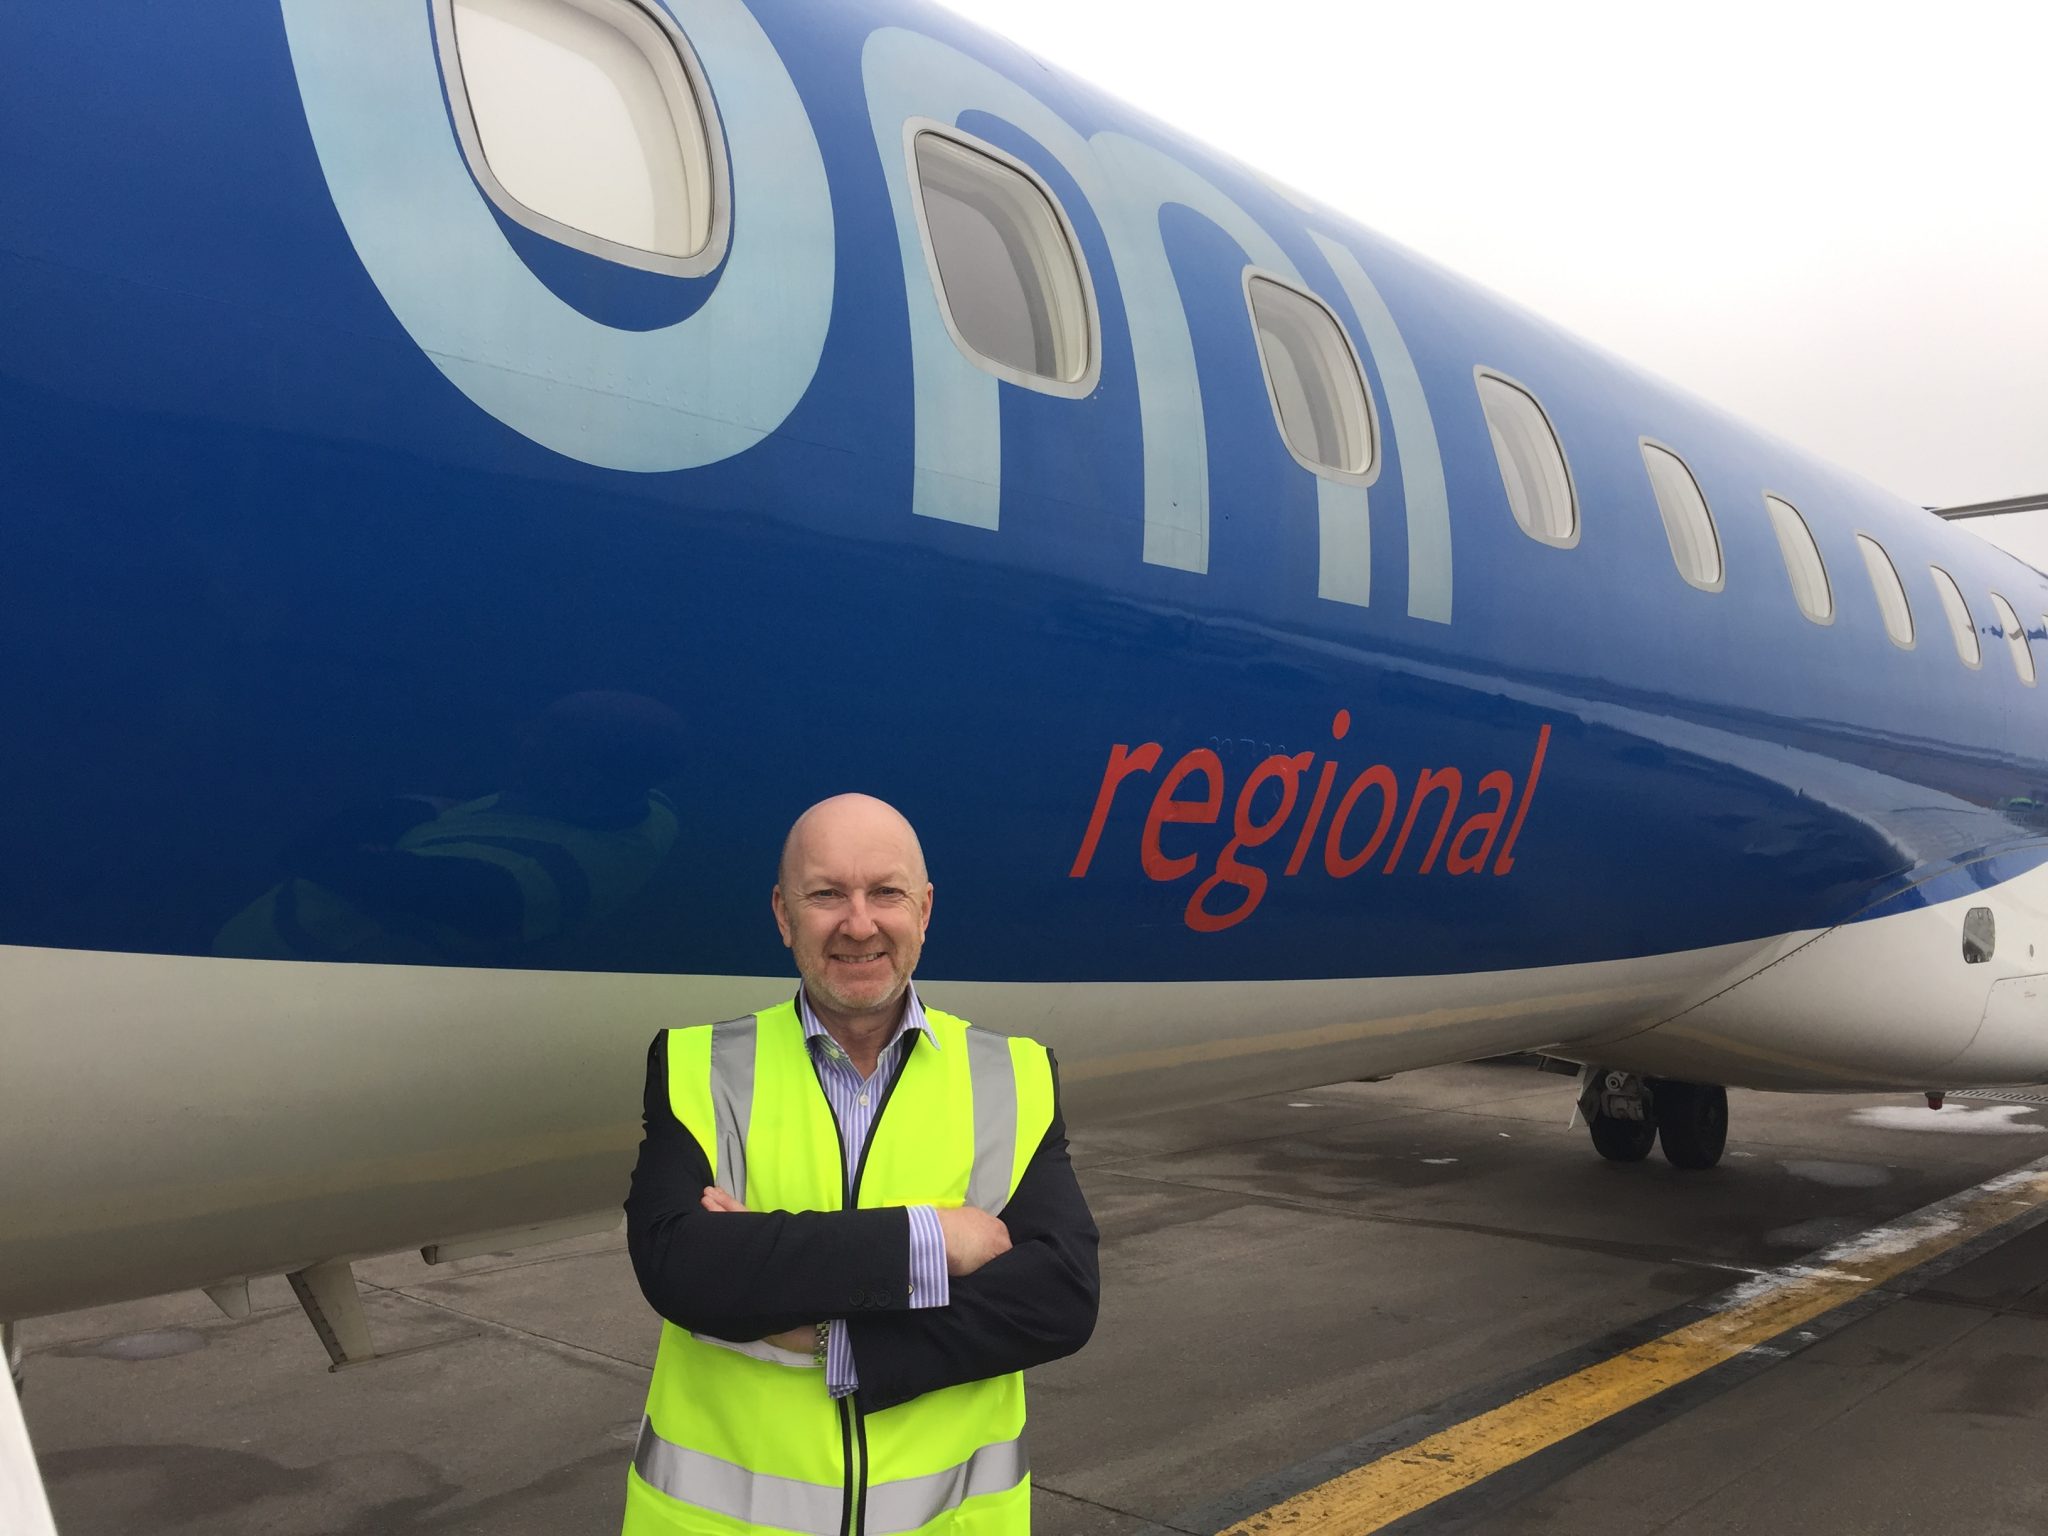 bmi regional appoints Martin Whittaker as Chief Operating Officer